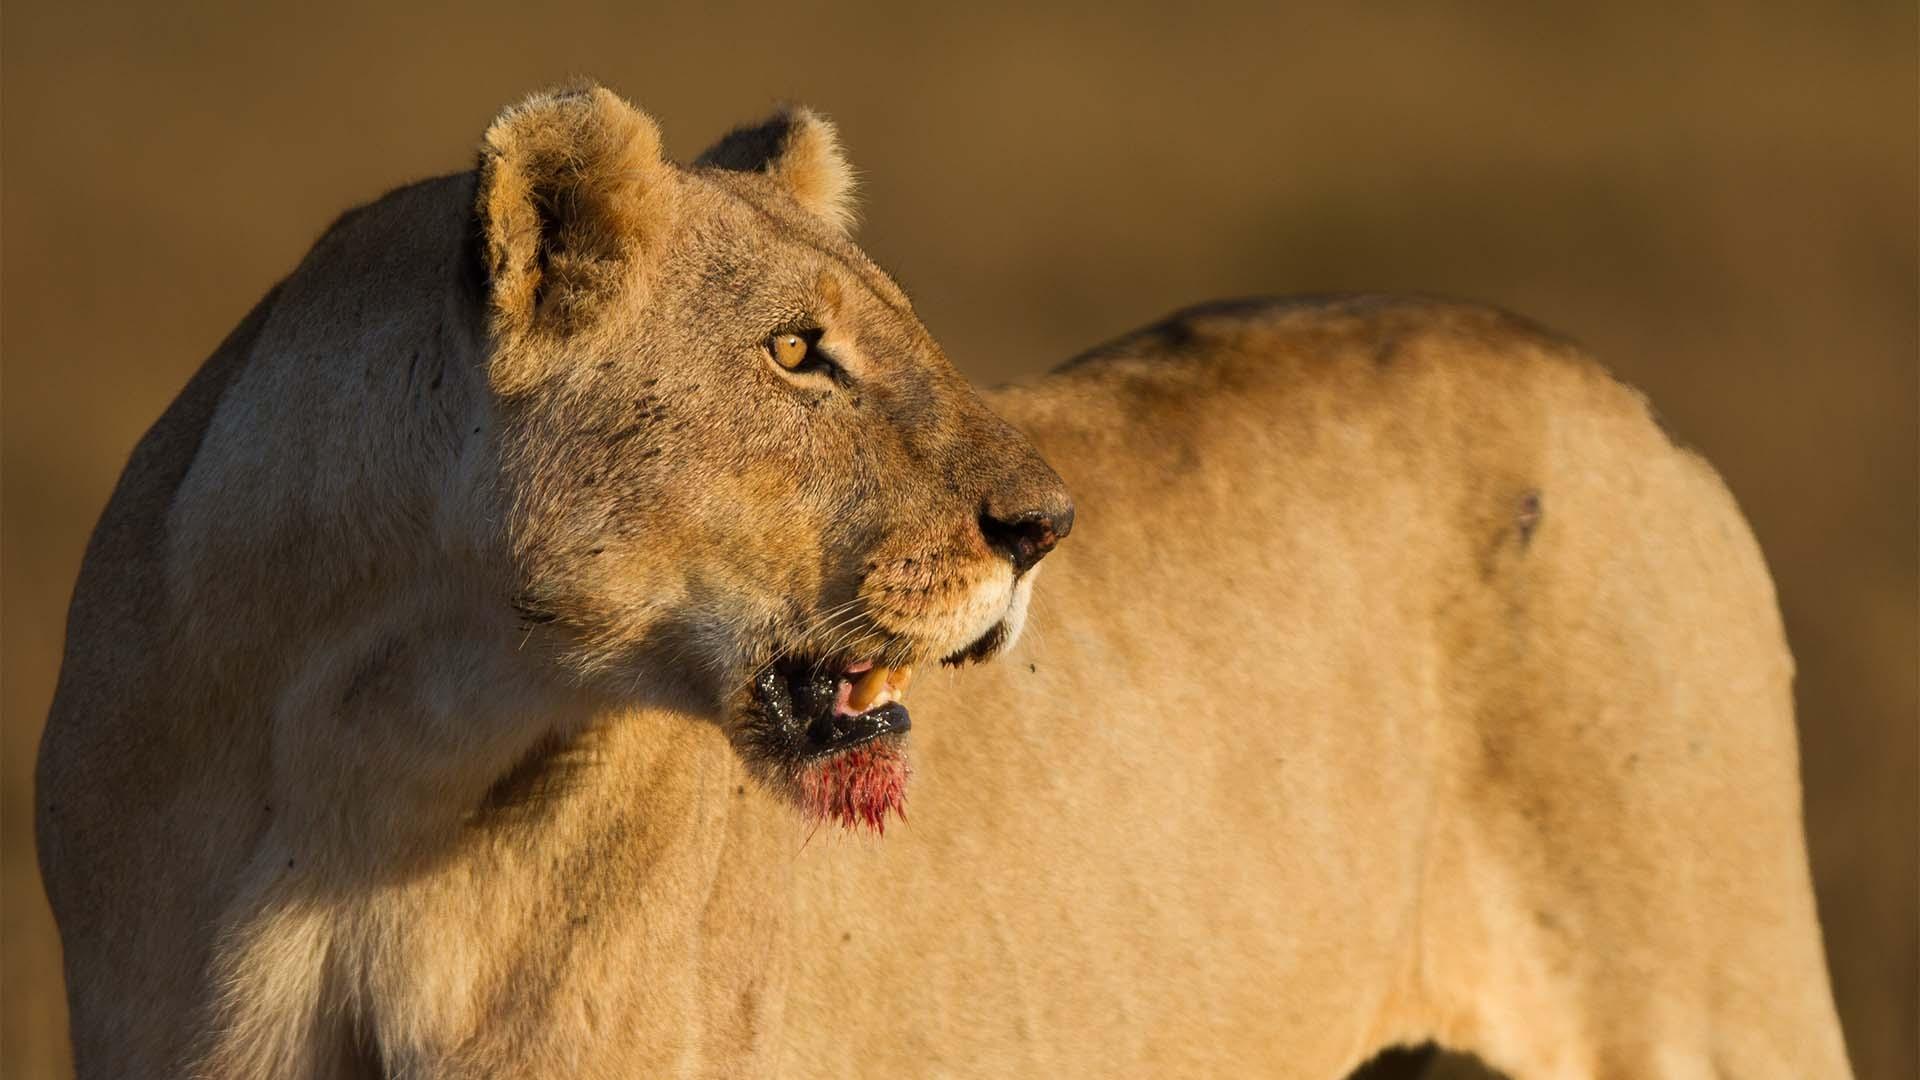 Closeup image of Bibi, a lion from the Marsh Pride.